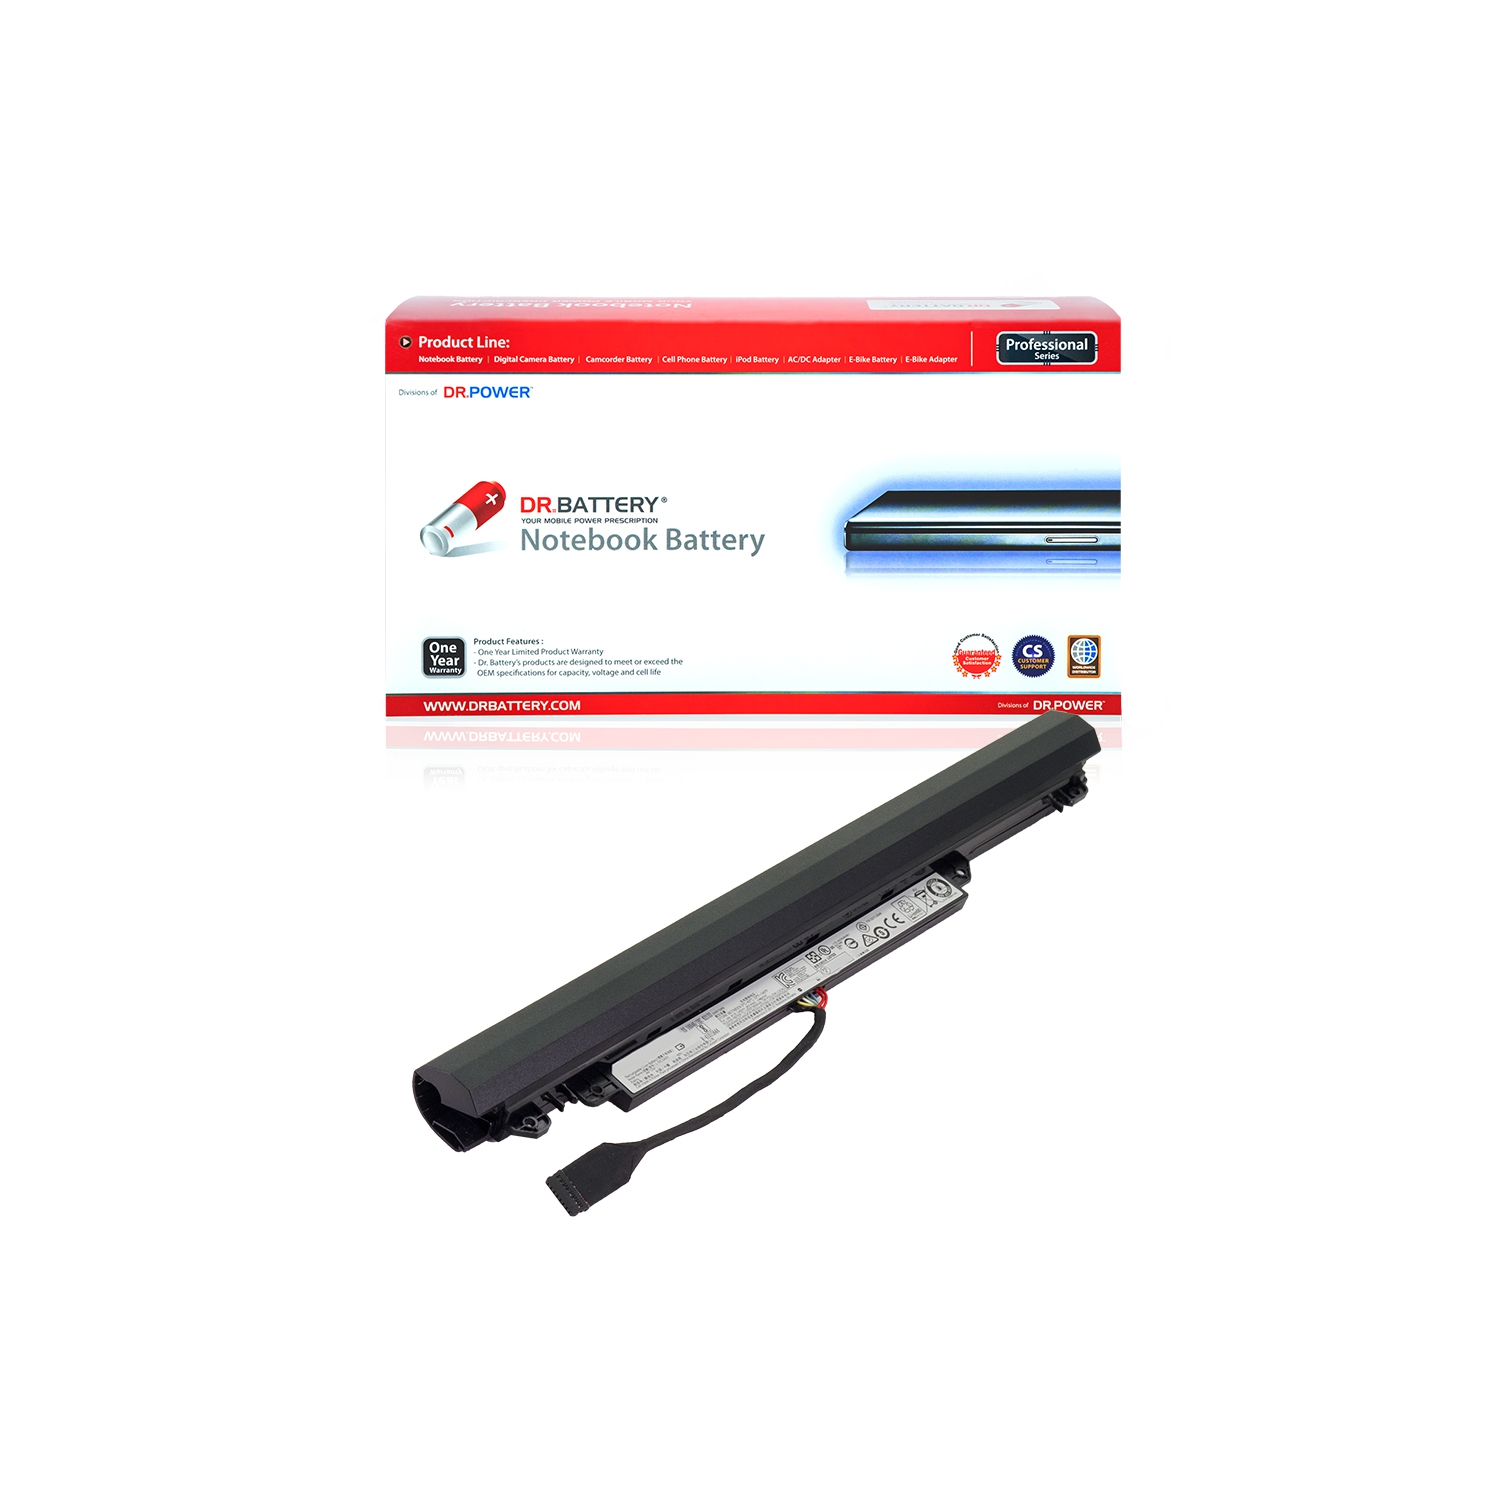 DR. BATTERY - Replacement for Lenovo IdeaPad 110-15IBR 80T70011US / 110-15IBR 80T70012US / L15S3A02 / 5B10L04166 / 5B10L04215